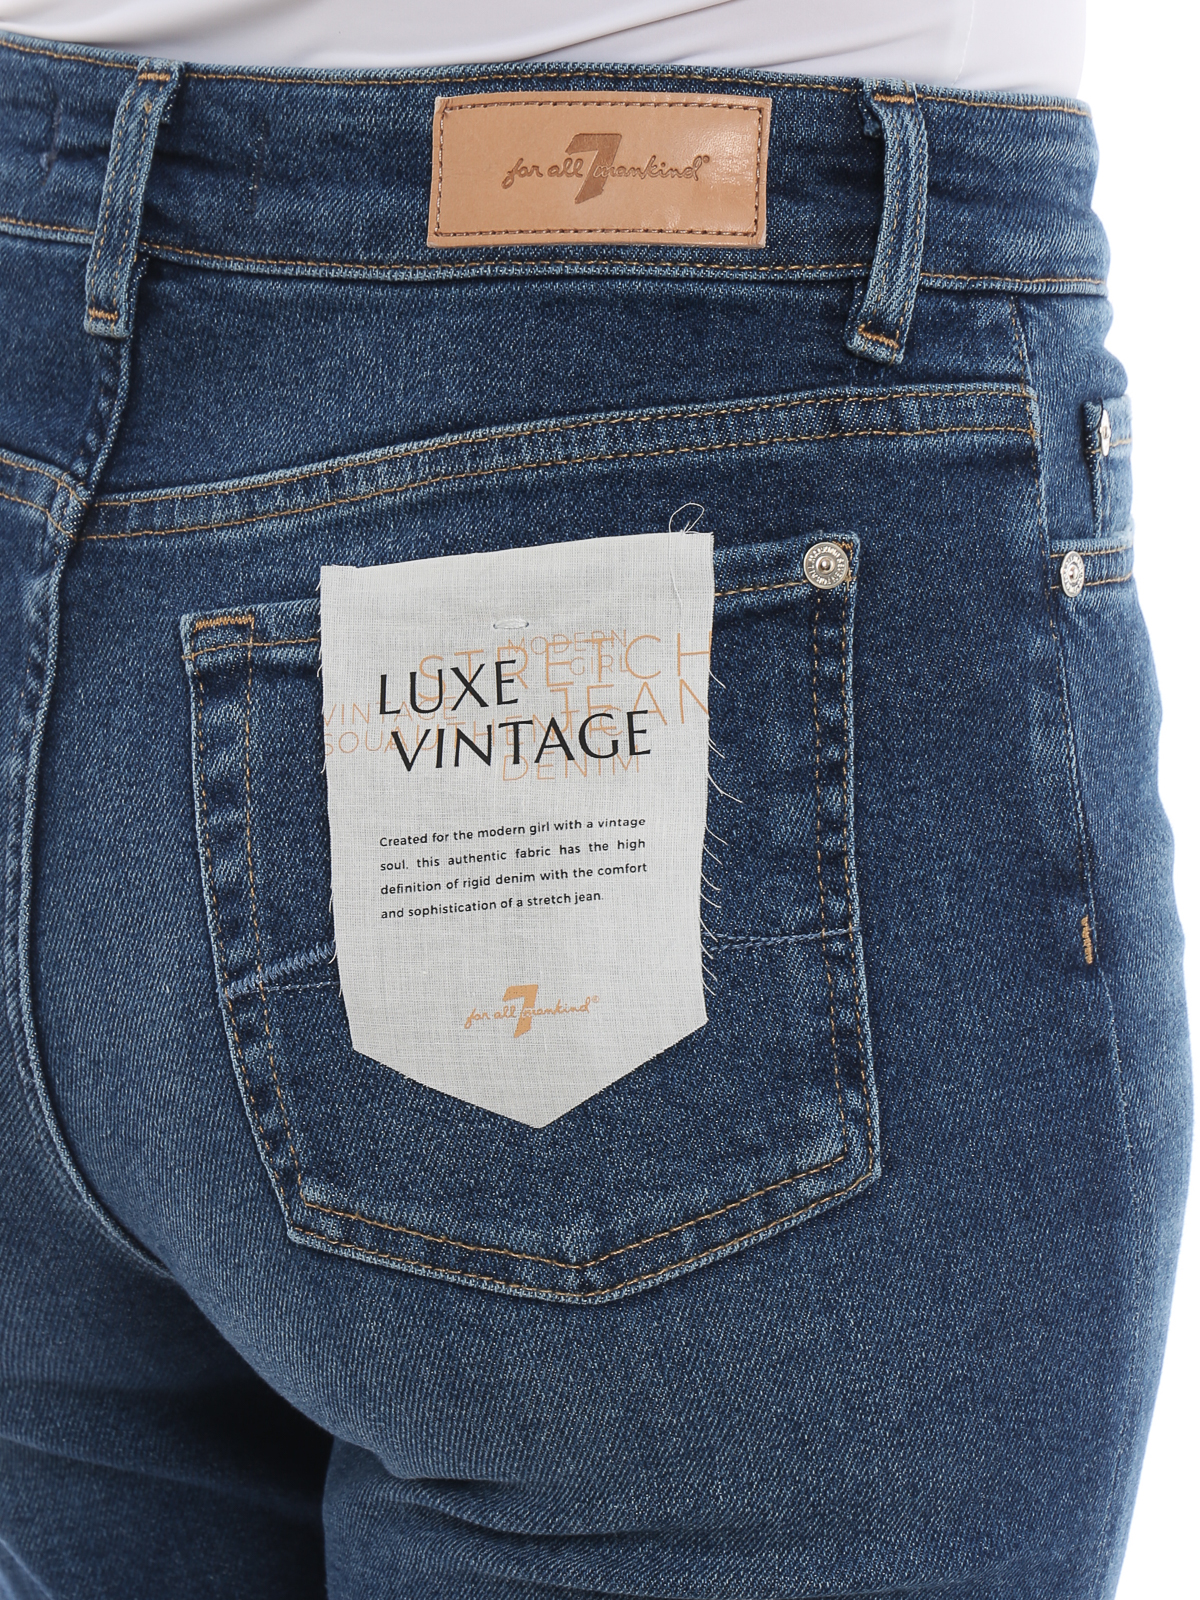 7 for all mankind luxe vintage